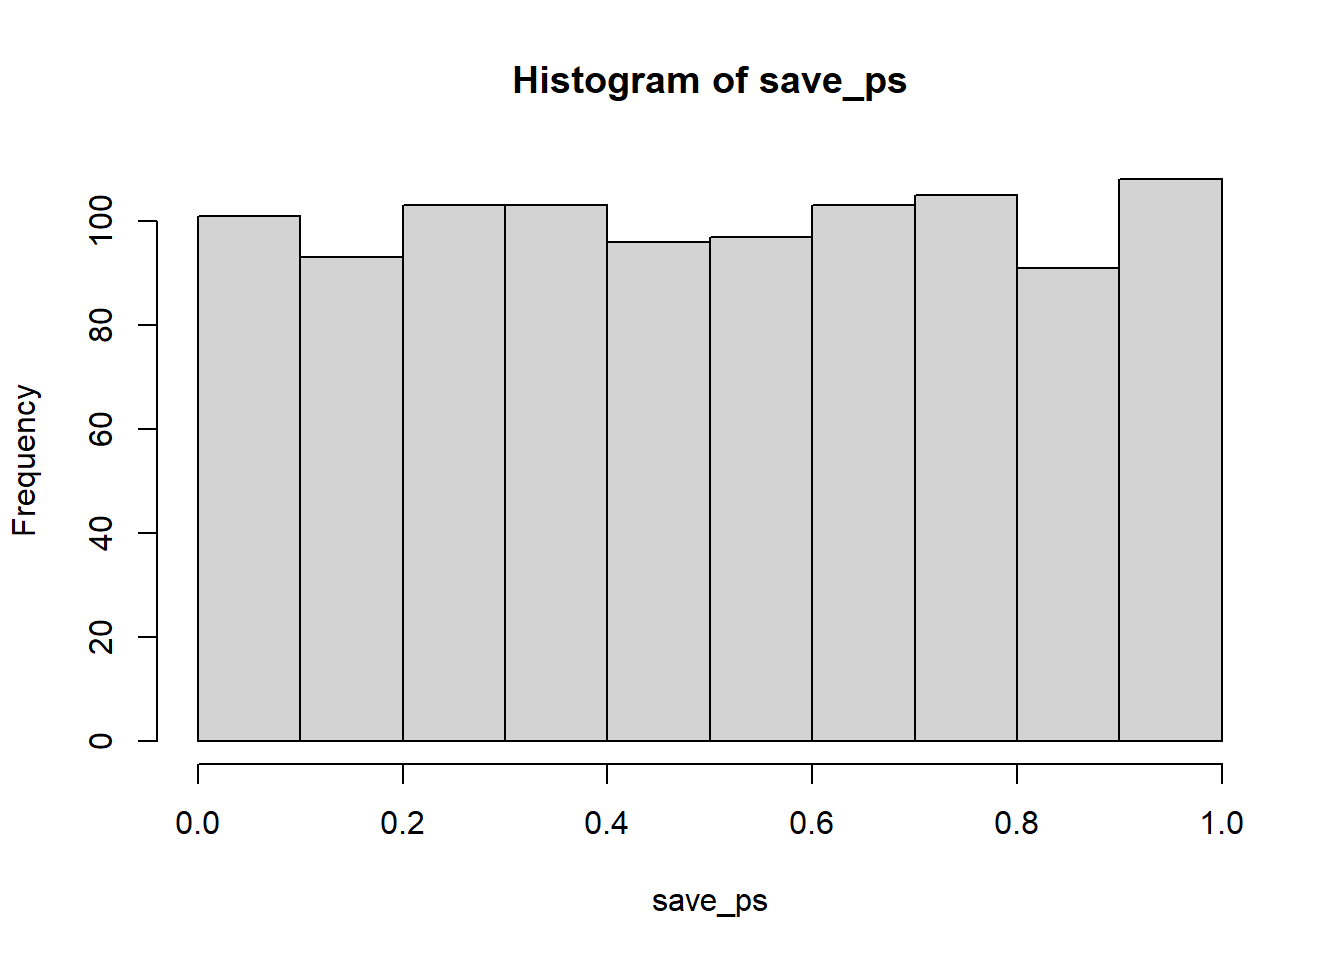 The distribution of p-values is flat under the null